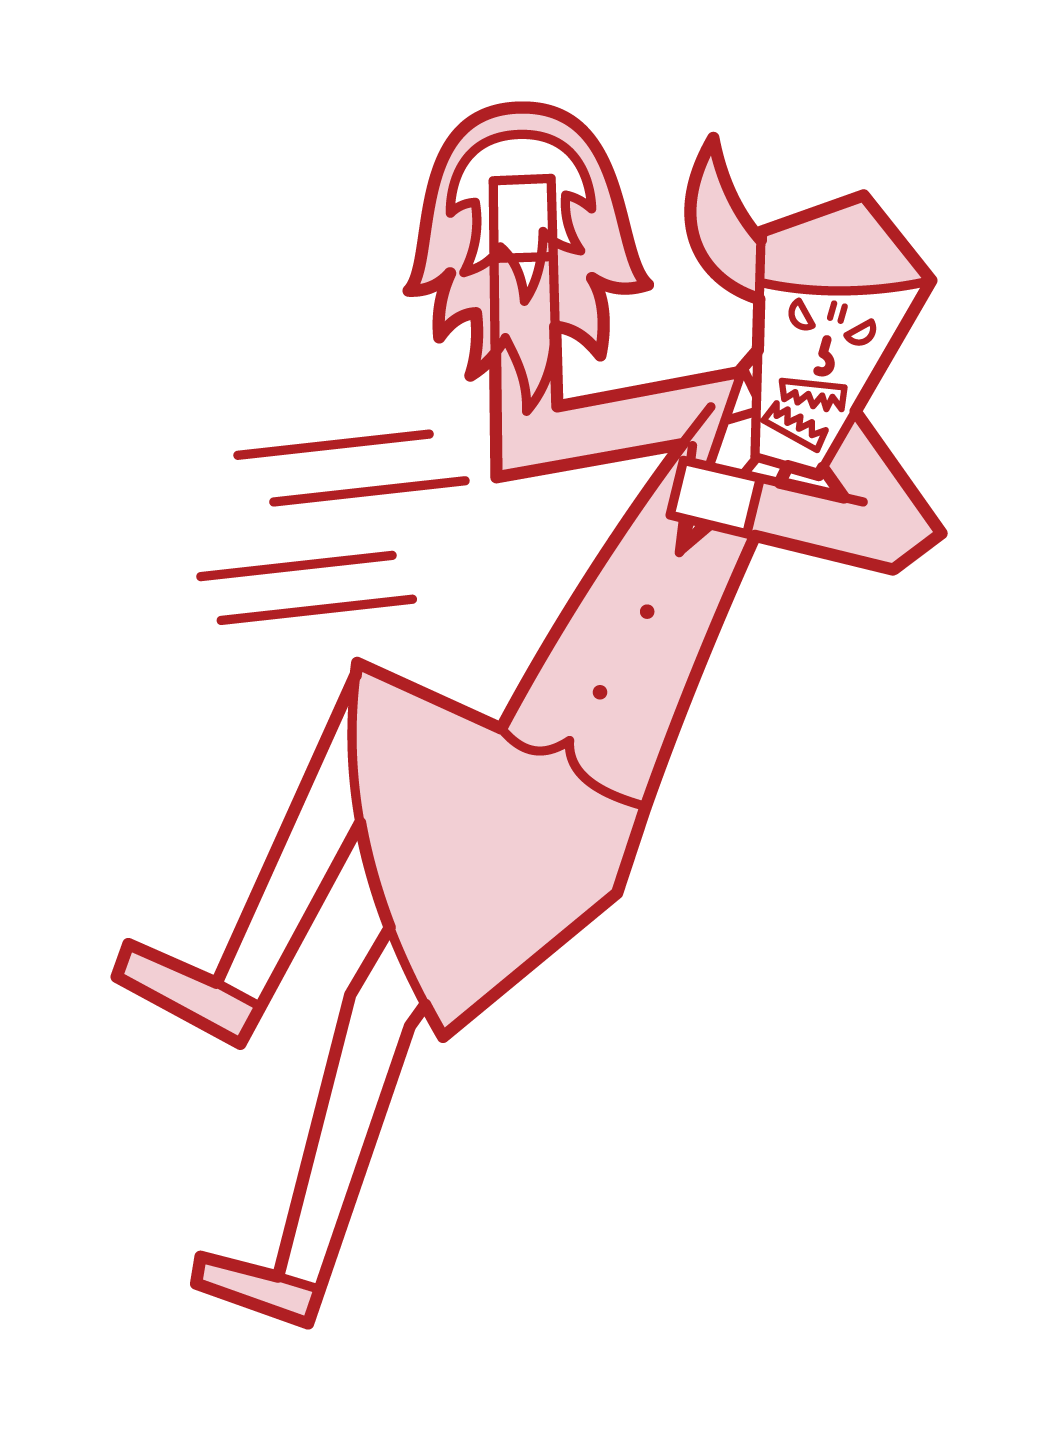 Illustration of a woman punching in anger